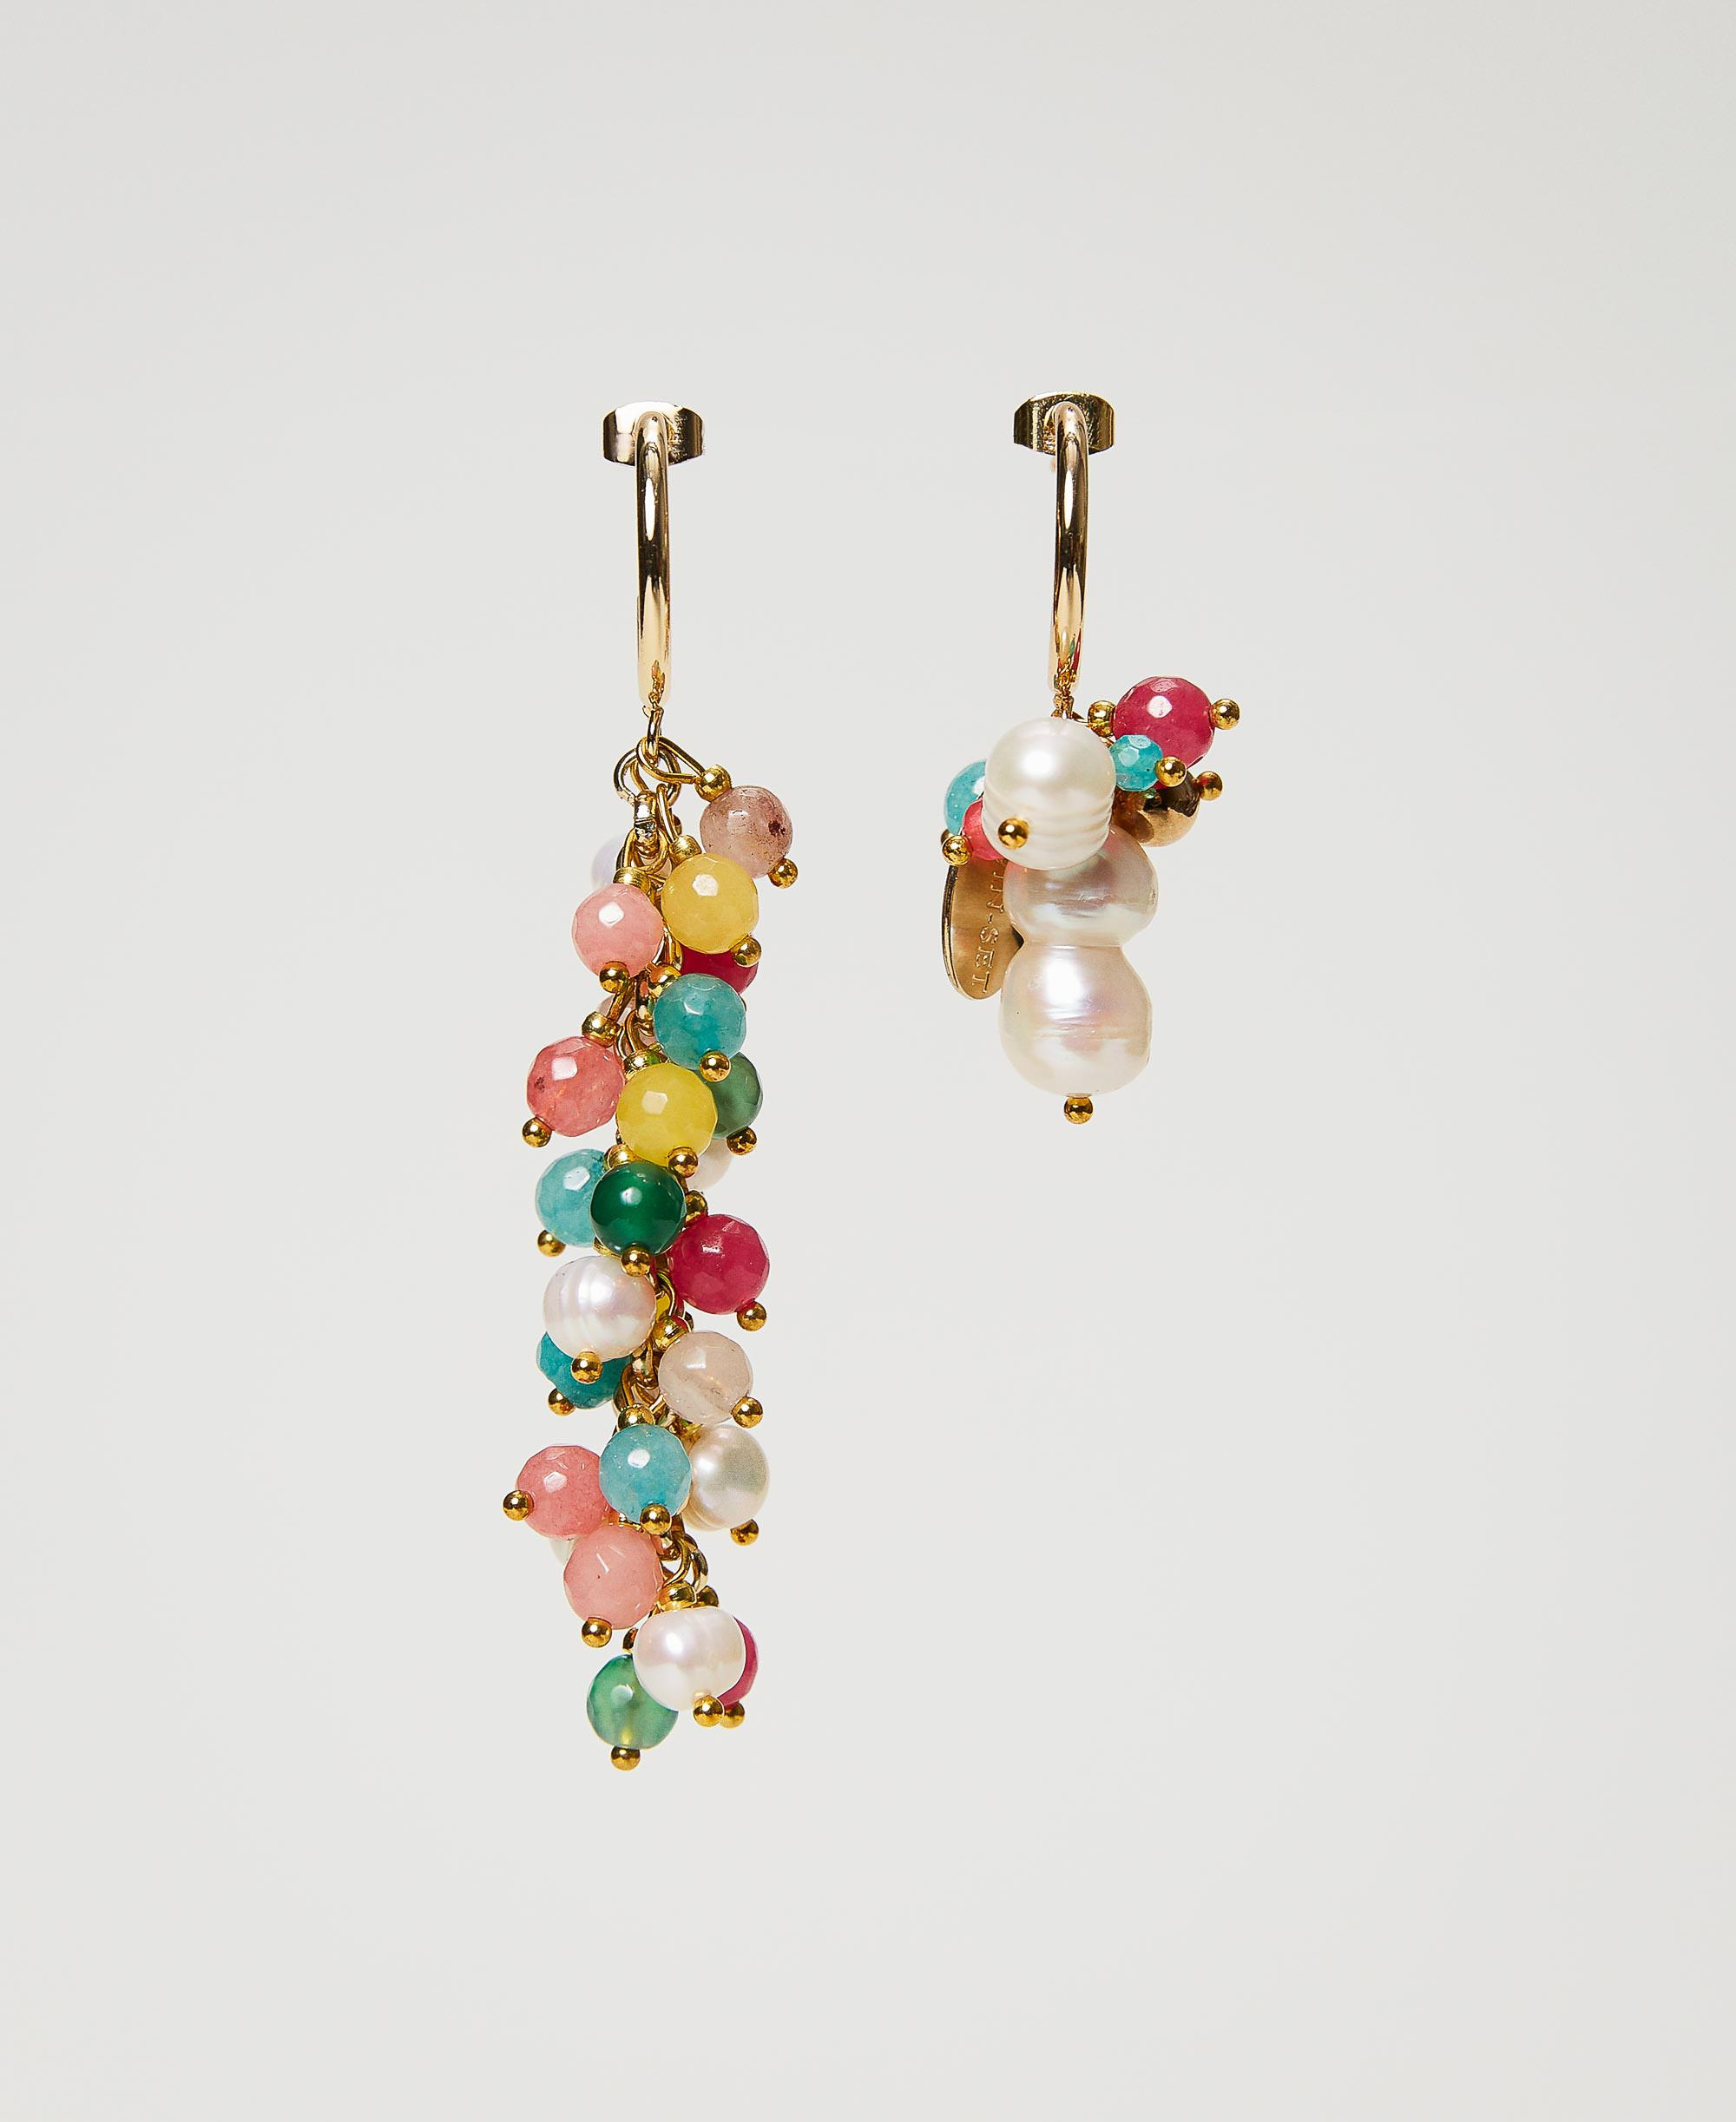 Asymmetric earrings with stones and pearls